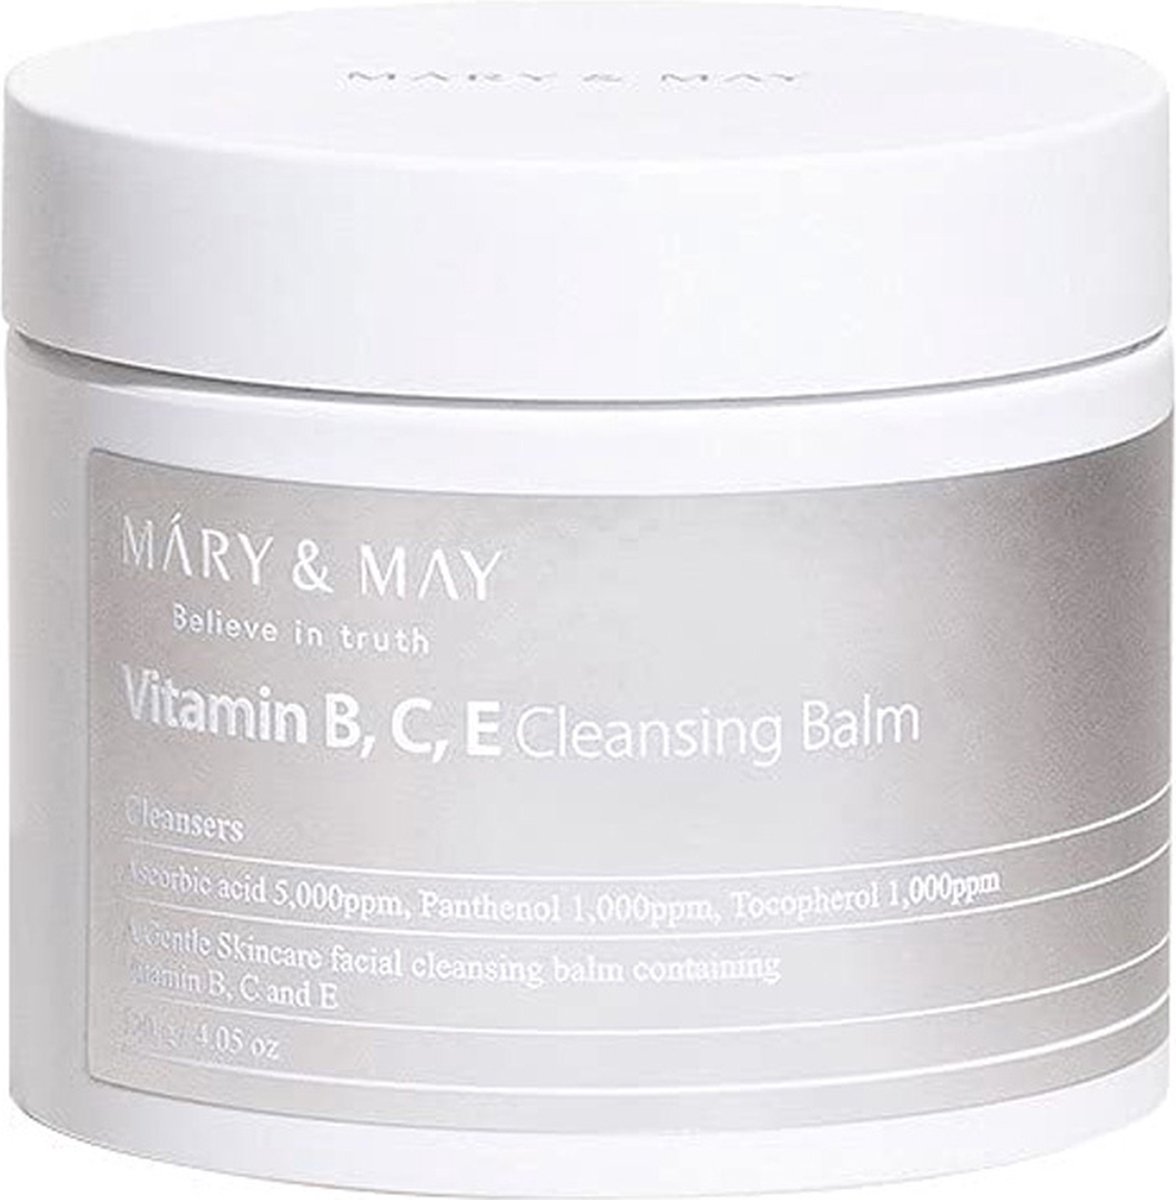 Mary & May Vitamine B.C.E Cleansing Balm 120 g 120g